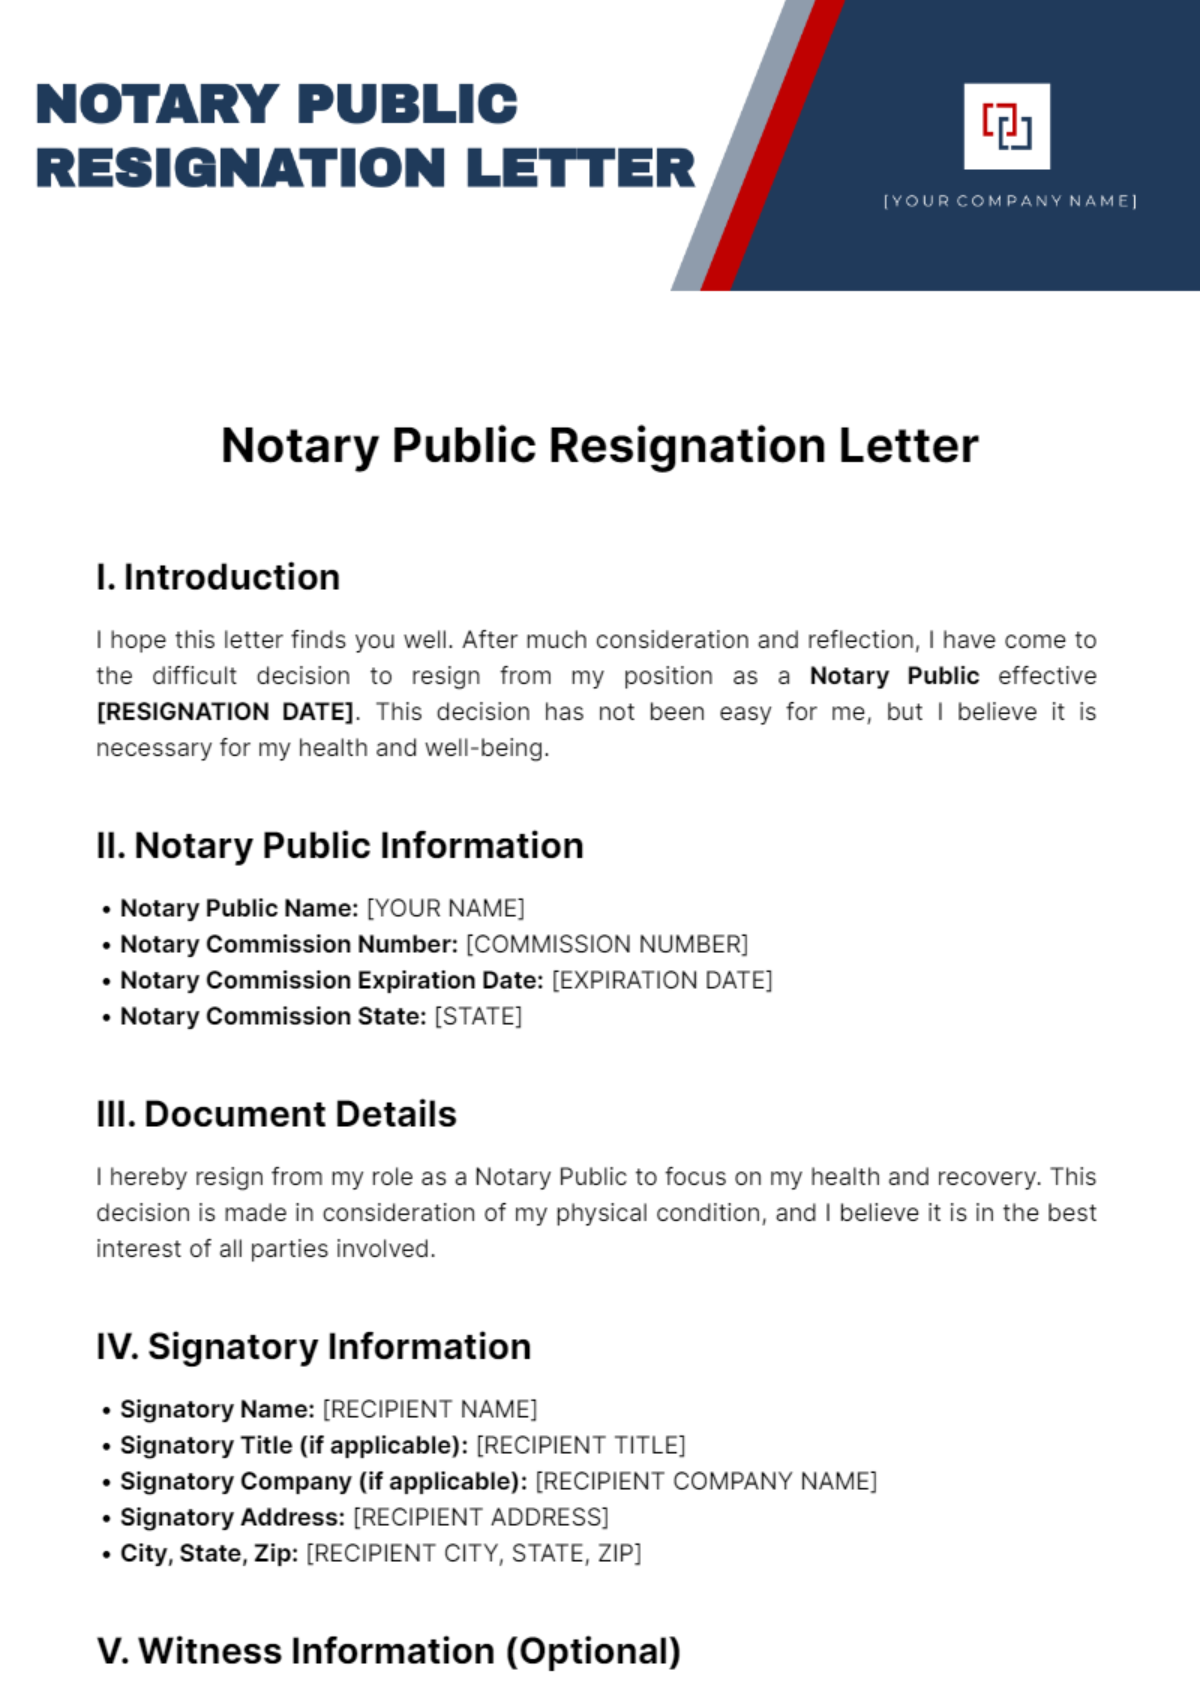 Notary Public Resignation Letter Template